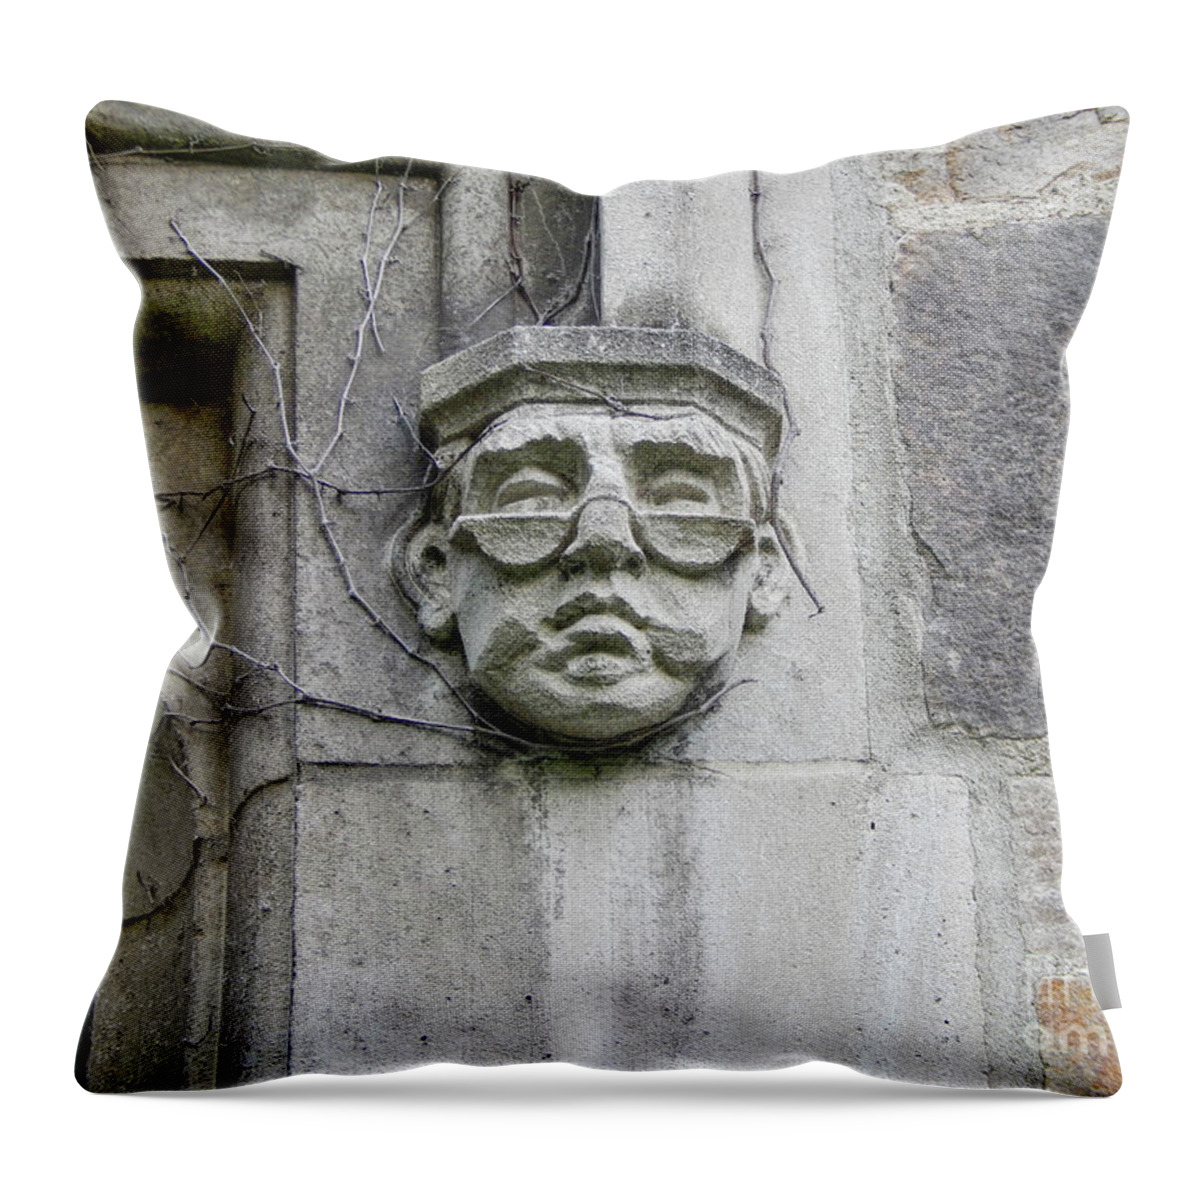 University Of Michigan Throw Pillow featuring the photograph Scholarly Face by Phil Perkins